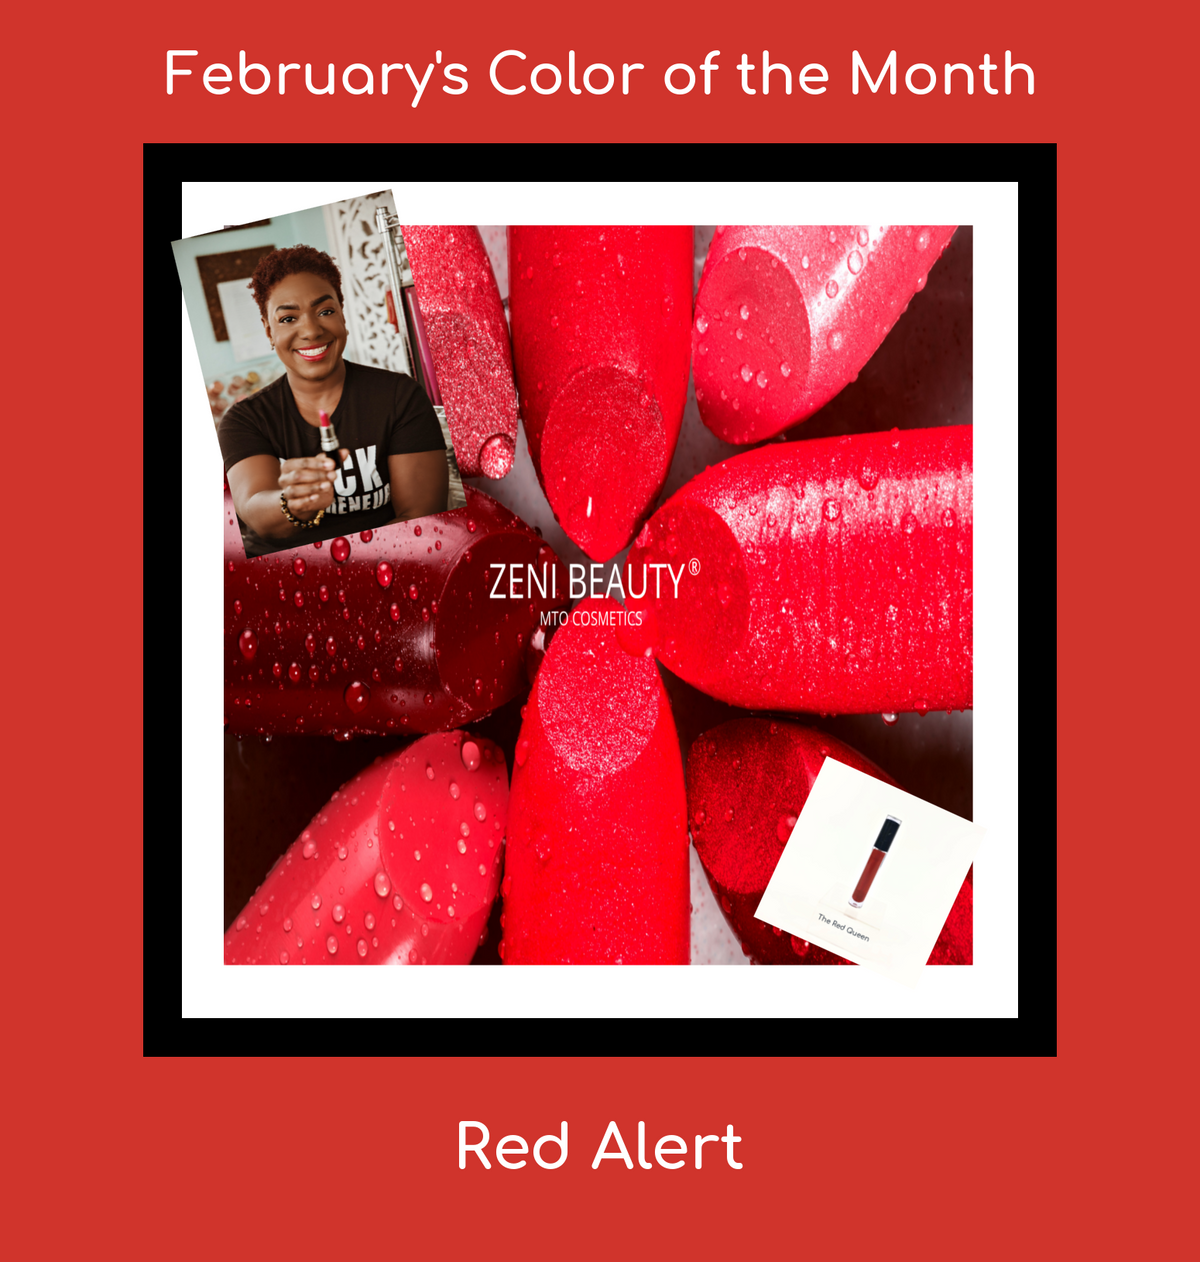 February 2022's Color of the Month is Red Alert